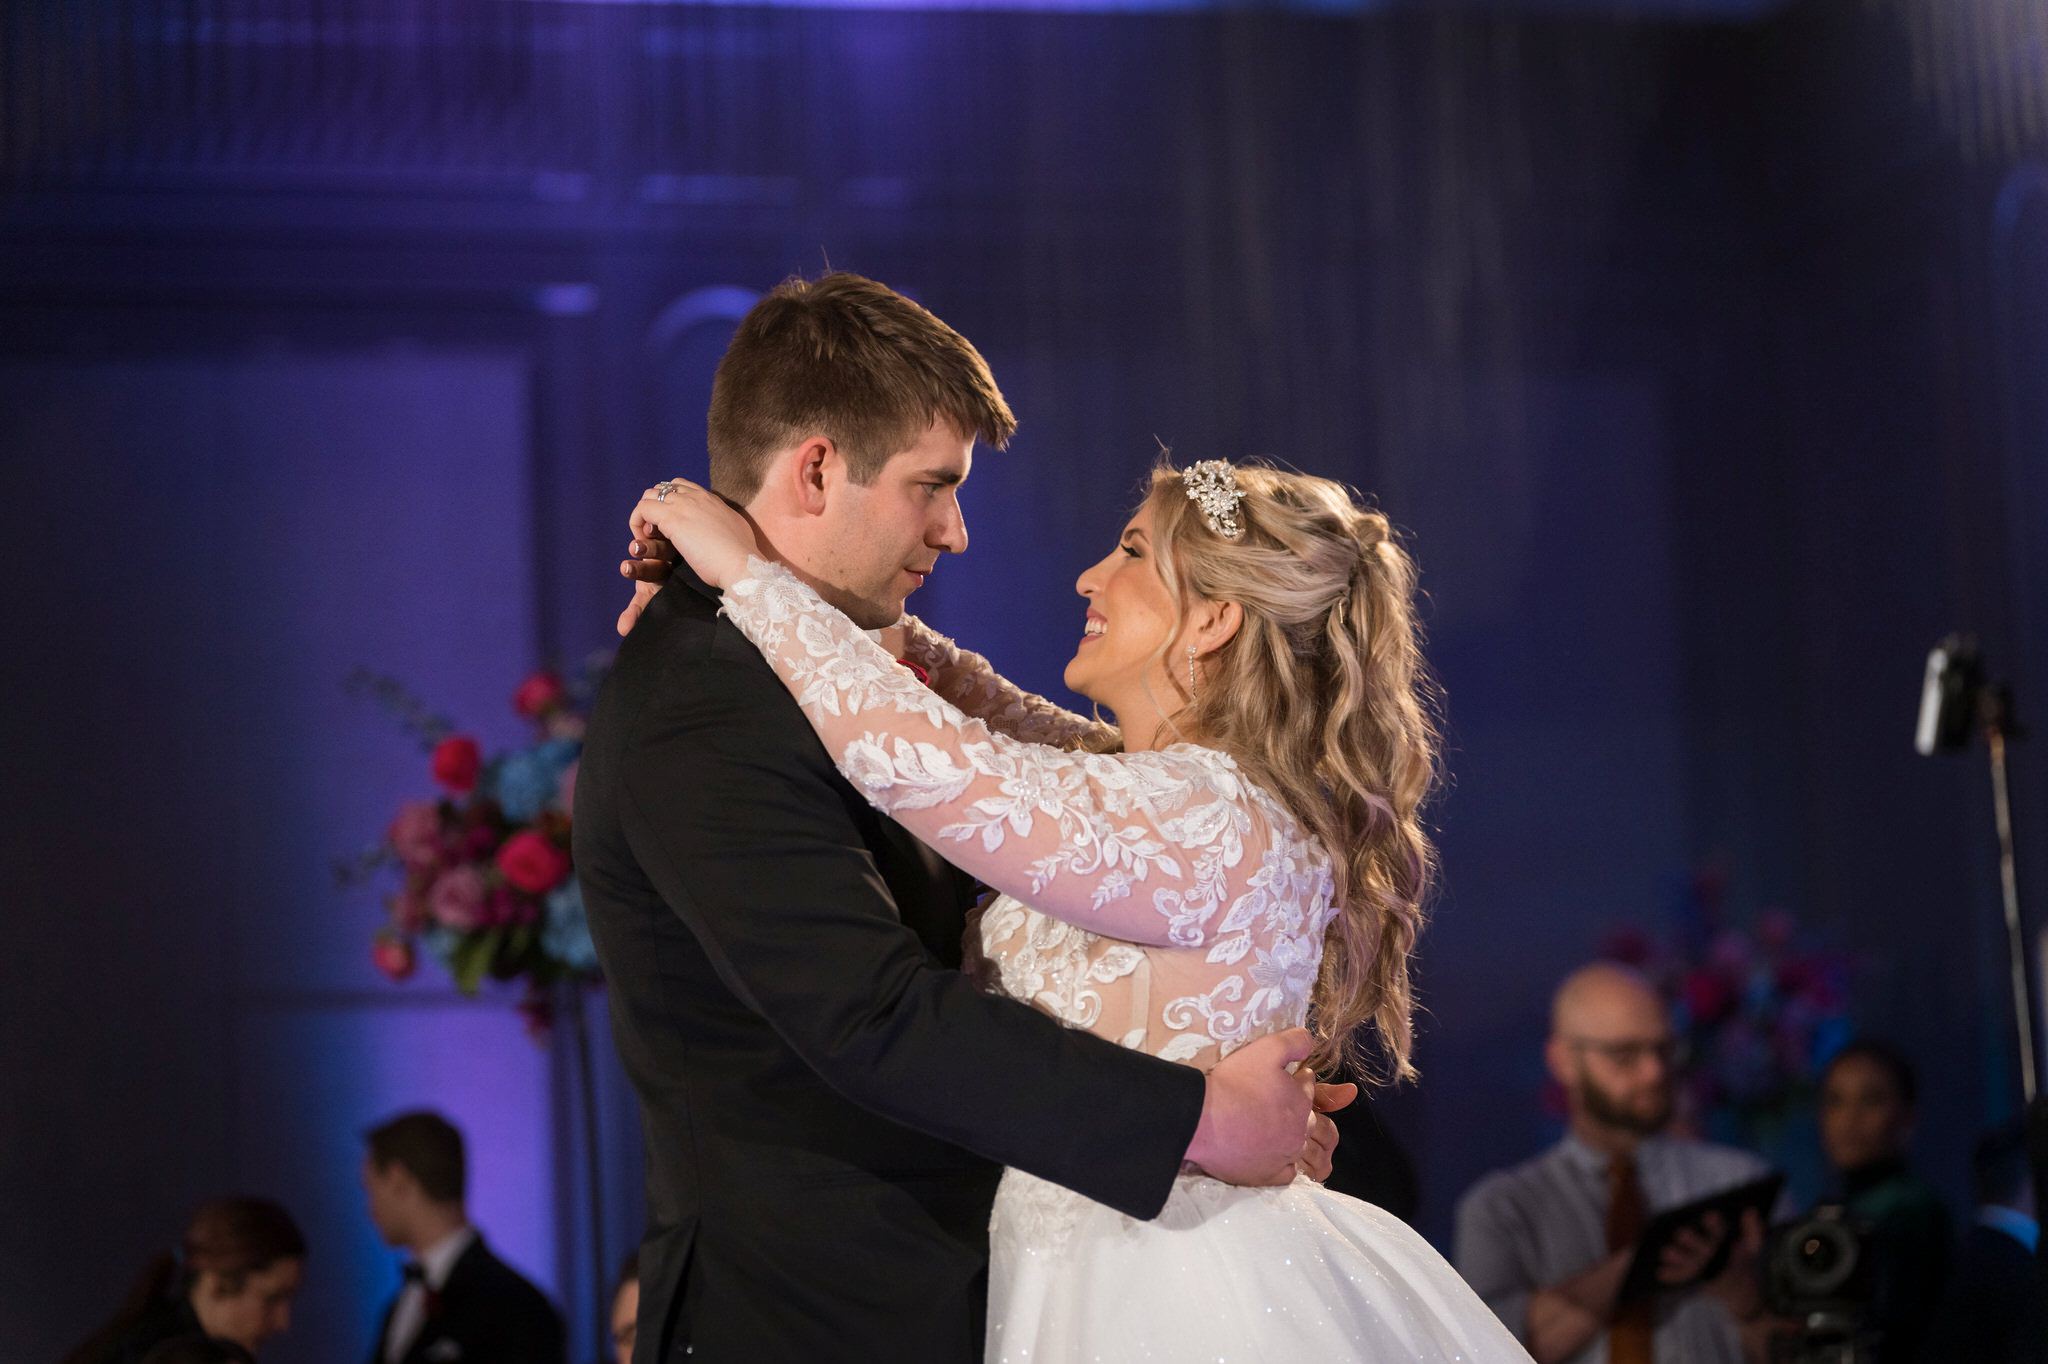 A bride and groom share a first dance at their Daxton Hotel wedding.  